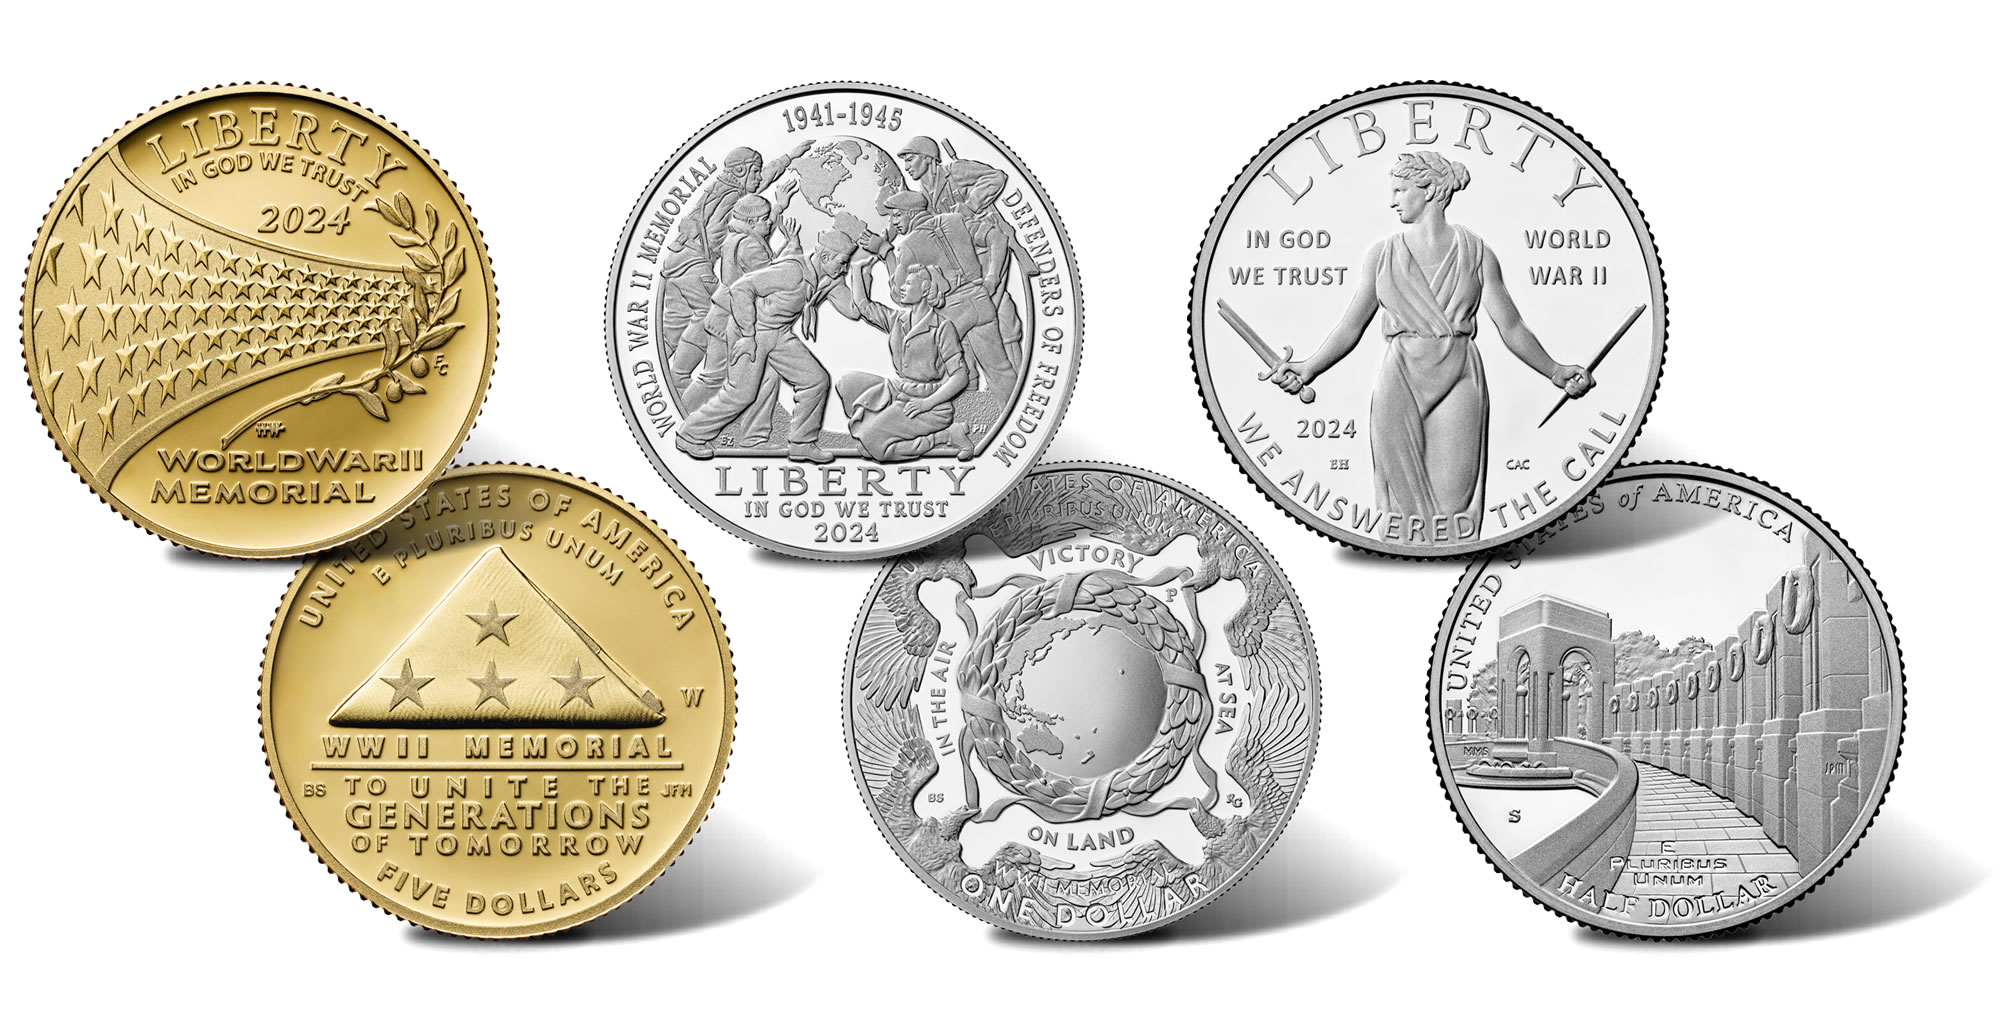 U.S. Gold Coin Melt Values, Gold Coin Prices